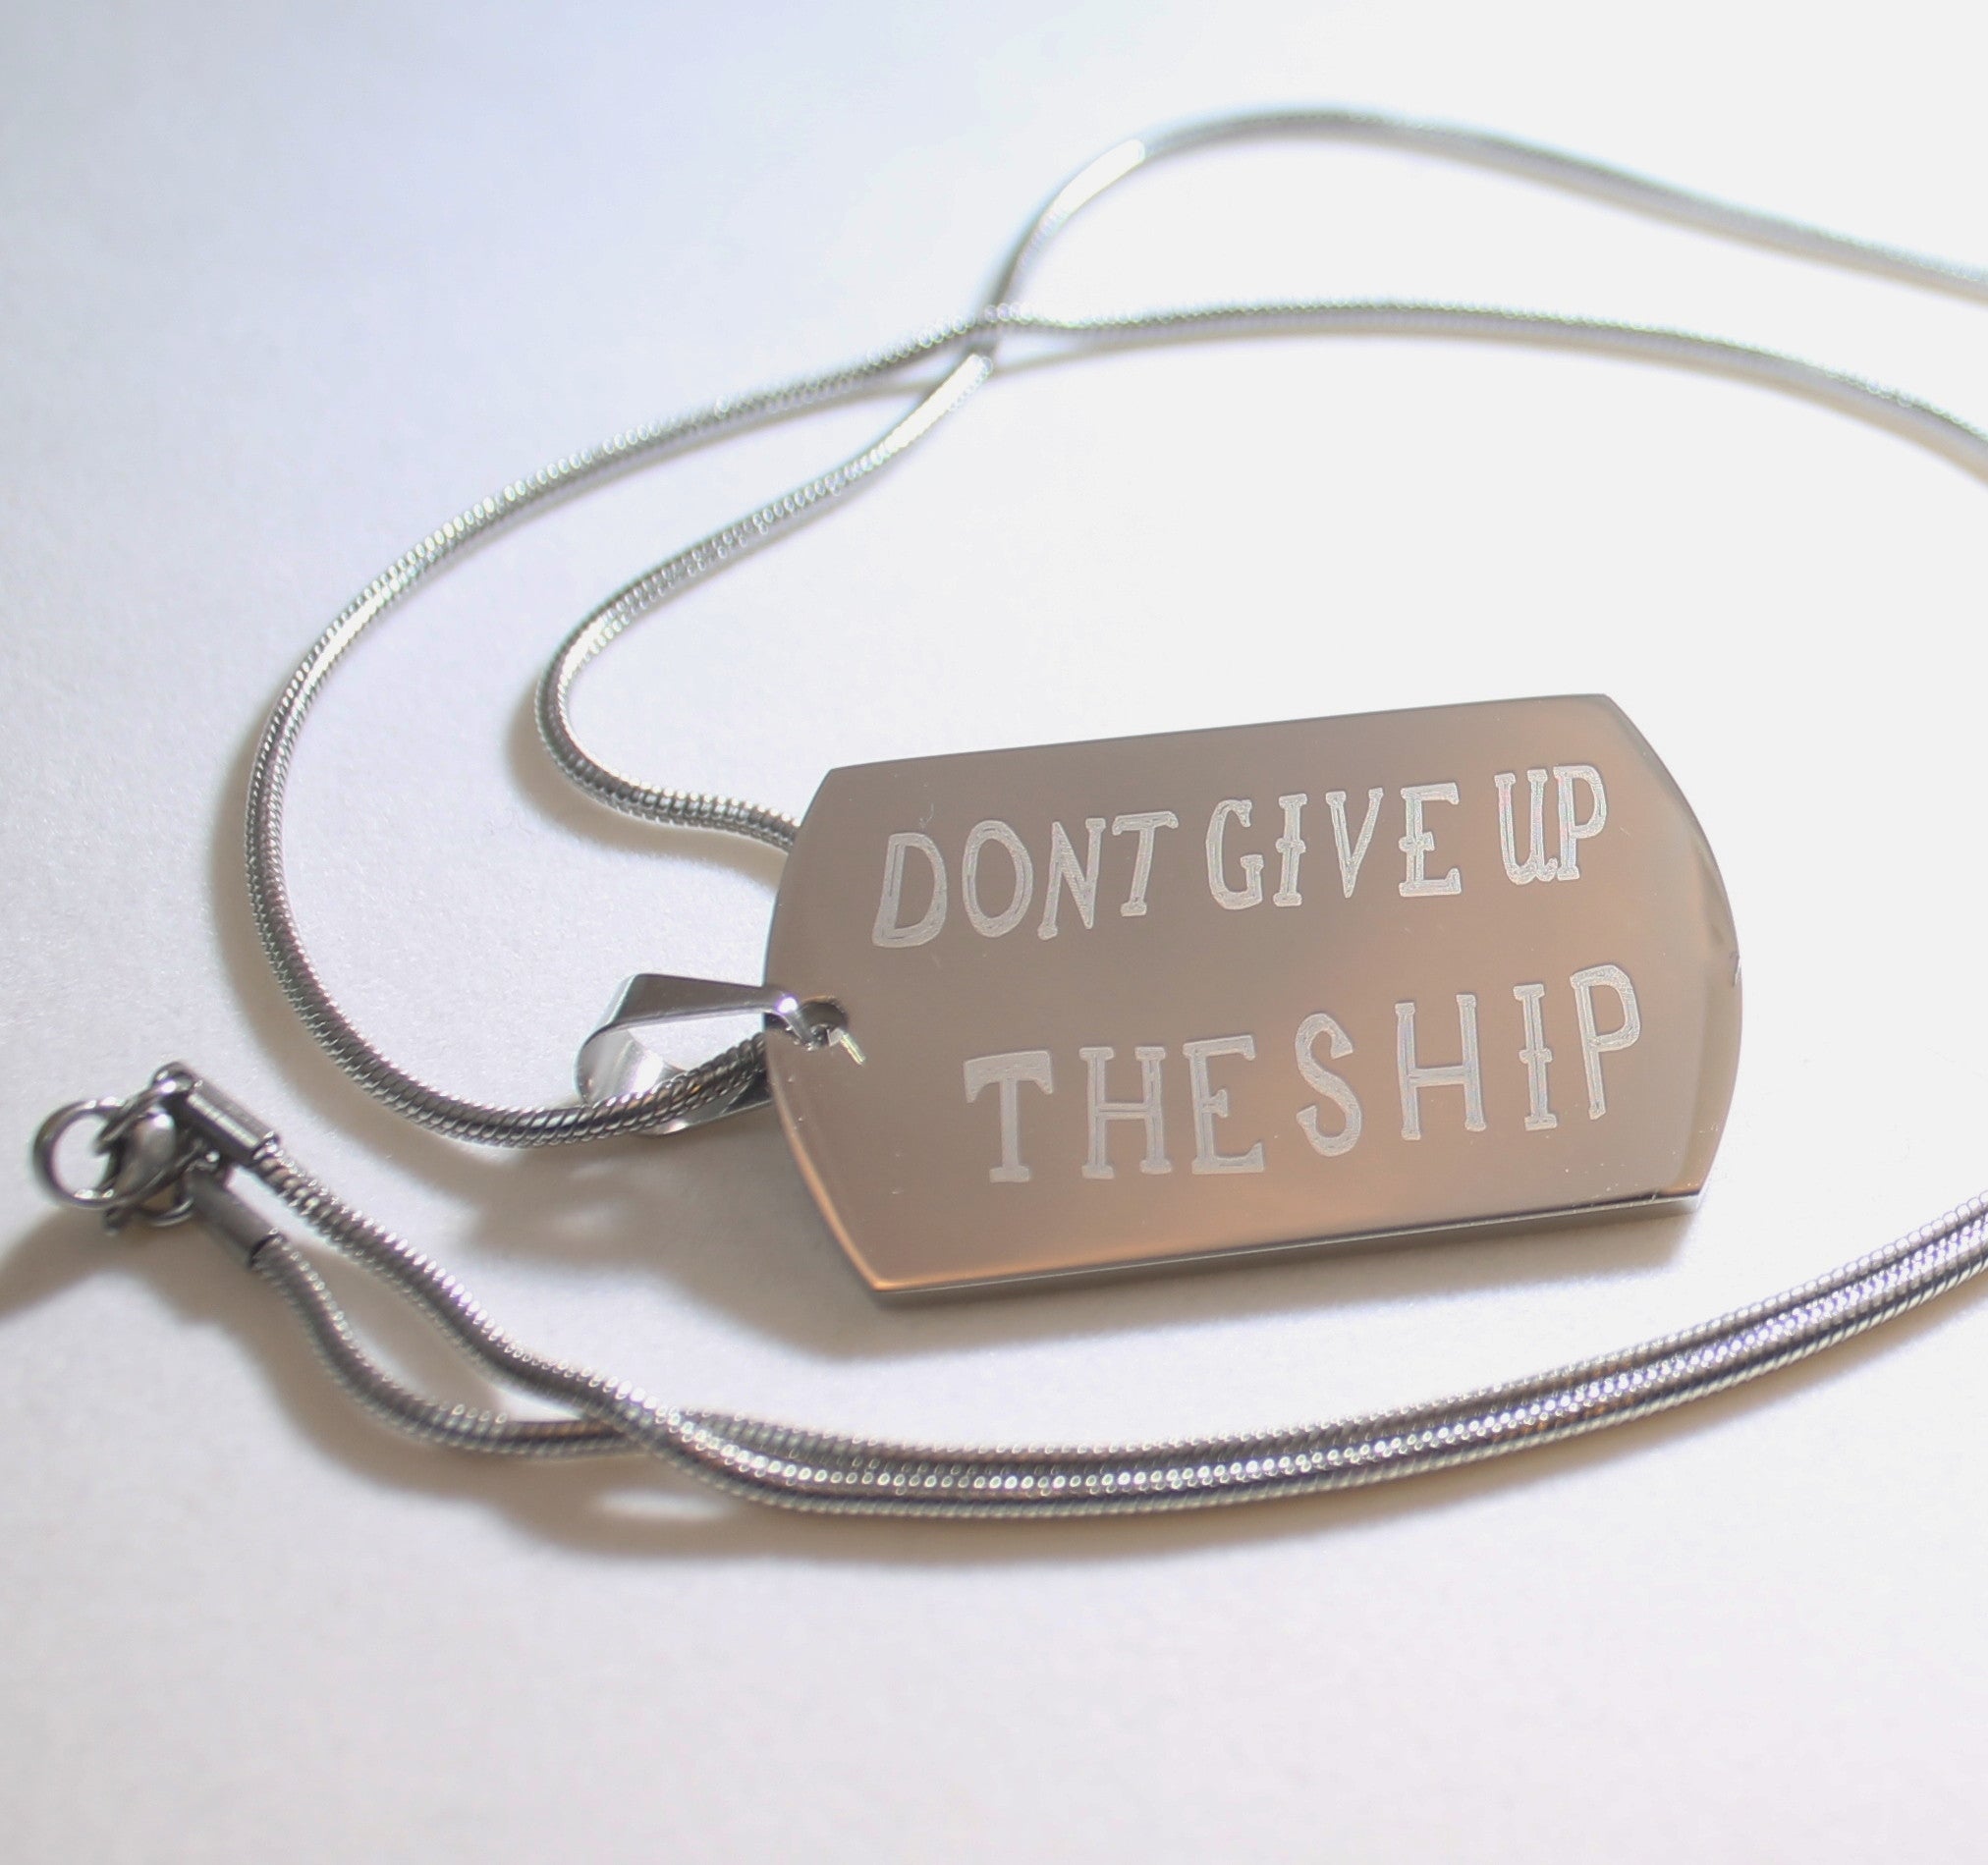 DONT GIVE UP THE SHIP NAVY MILITARY MOTIVATIONAL THICK STAINLESS STEEL DOG TAG SNAKE CHAIN - Samstagsandmore